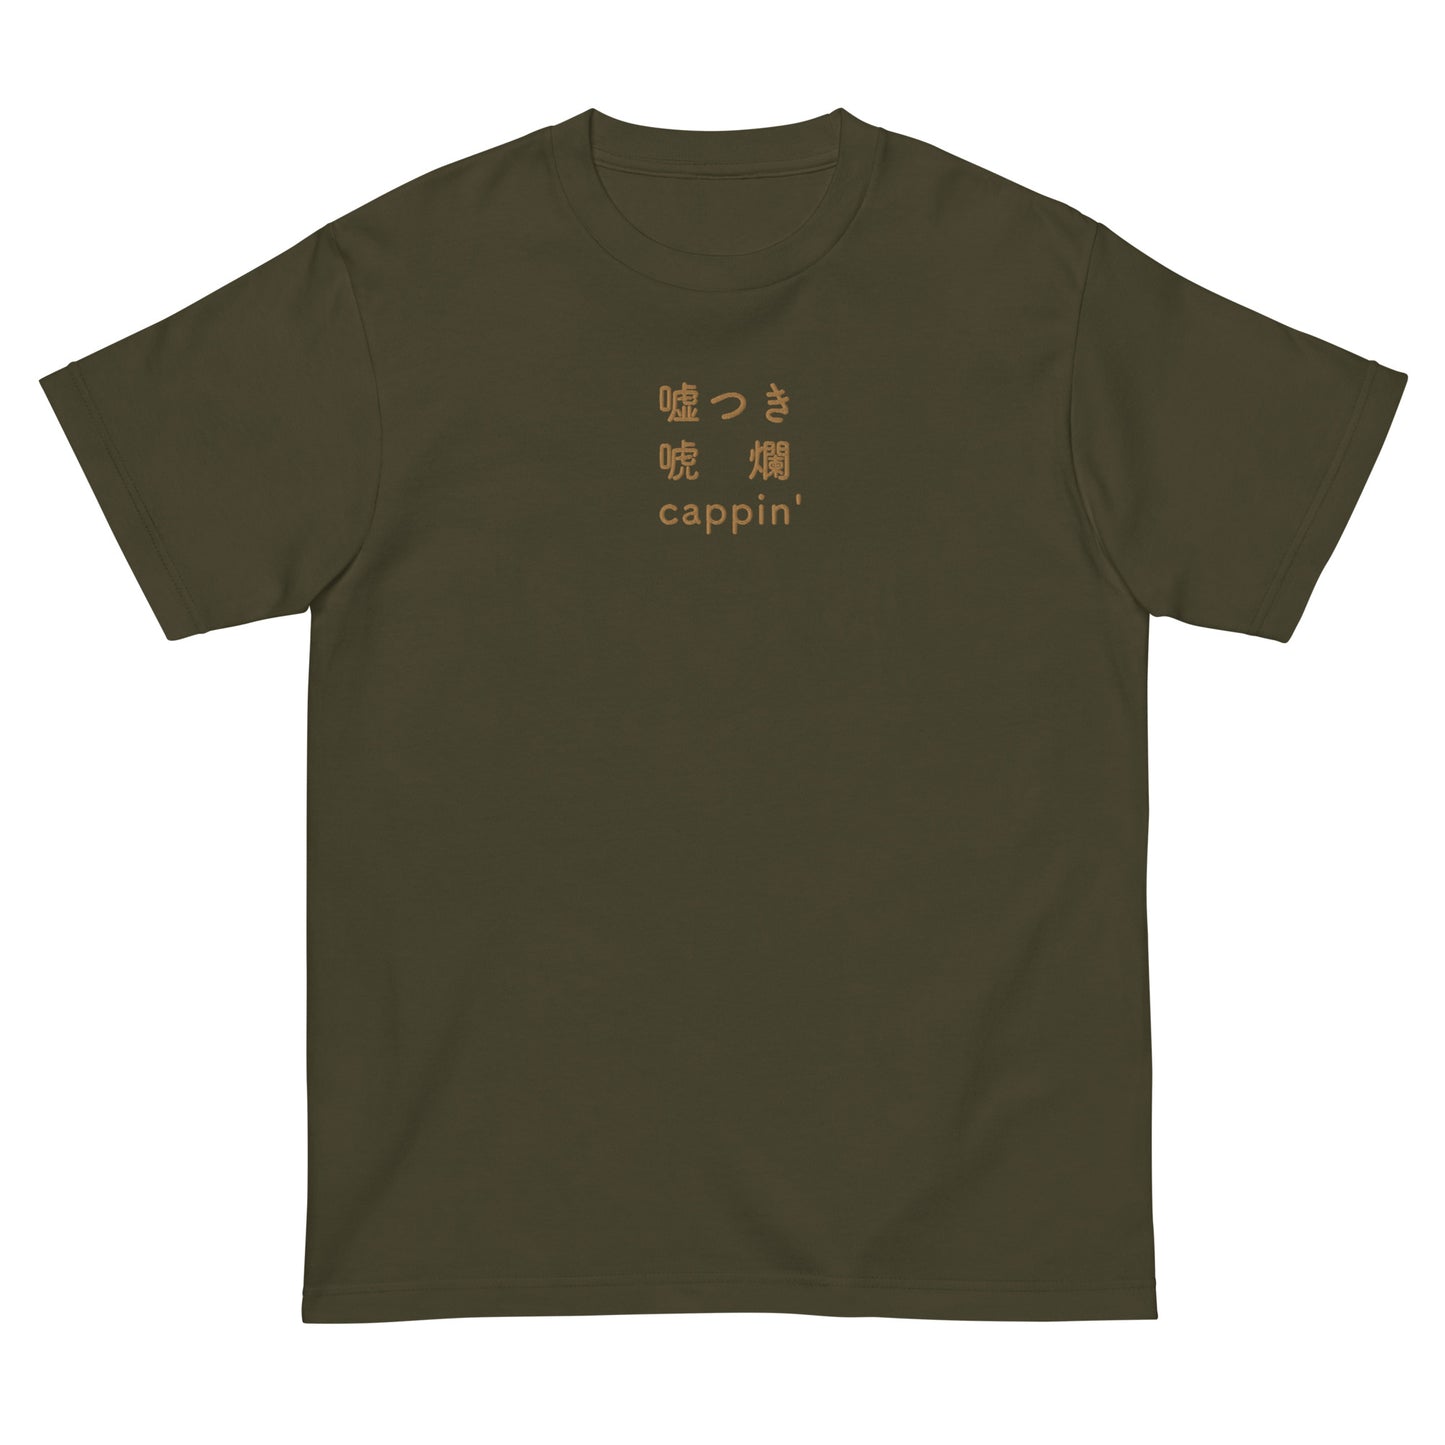 Green High Quality Tee - Front Design with an Brown Embroidery "Cappin'" in Japanese,Chinese and English